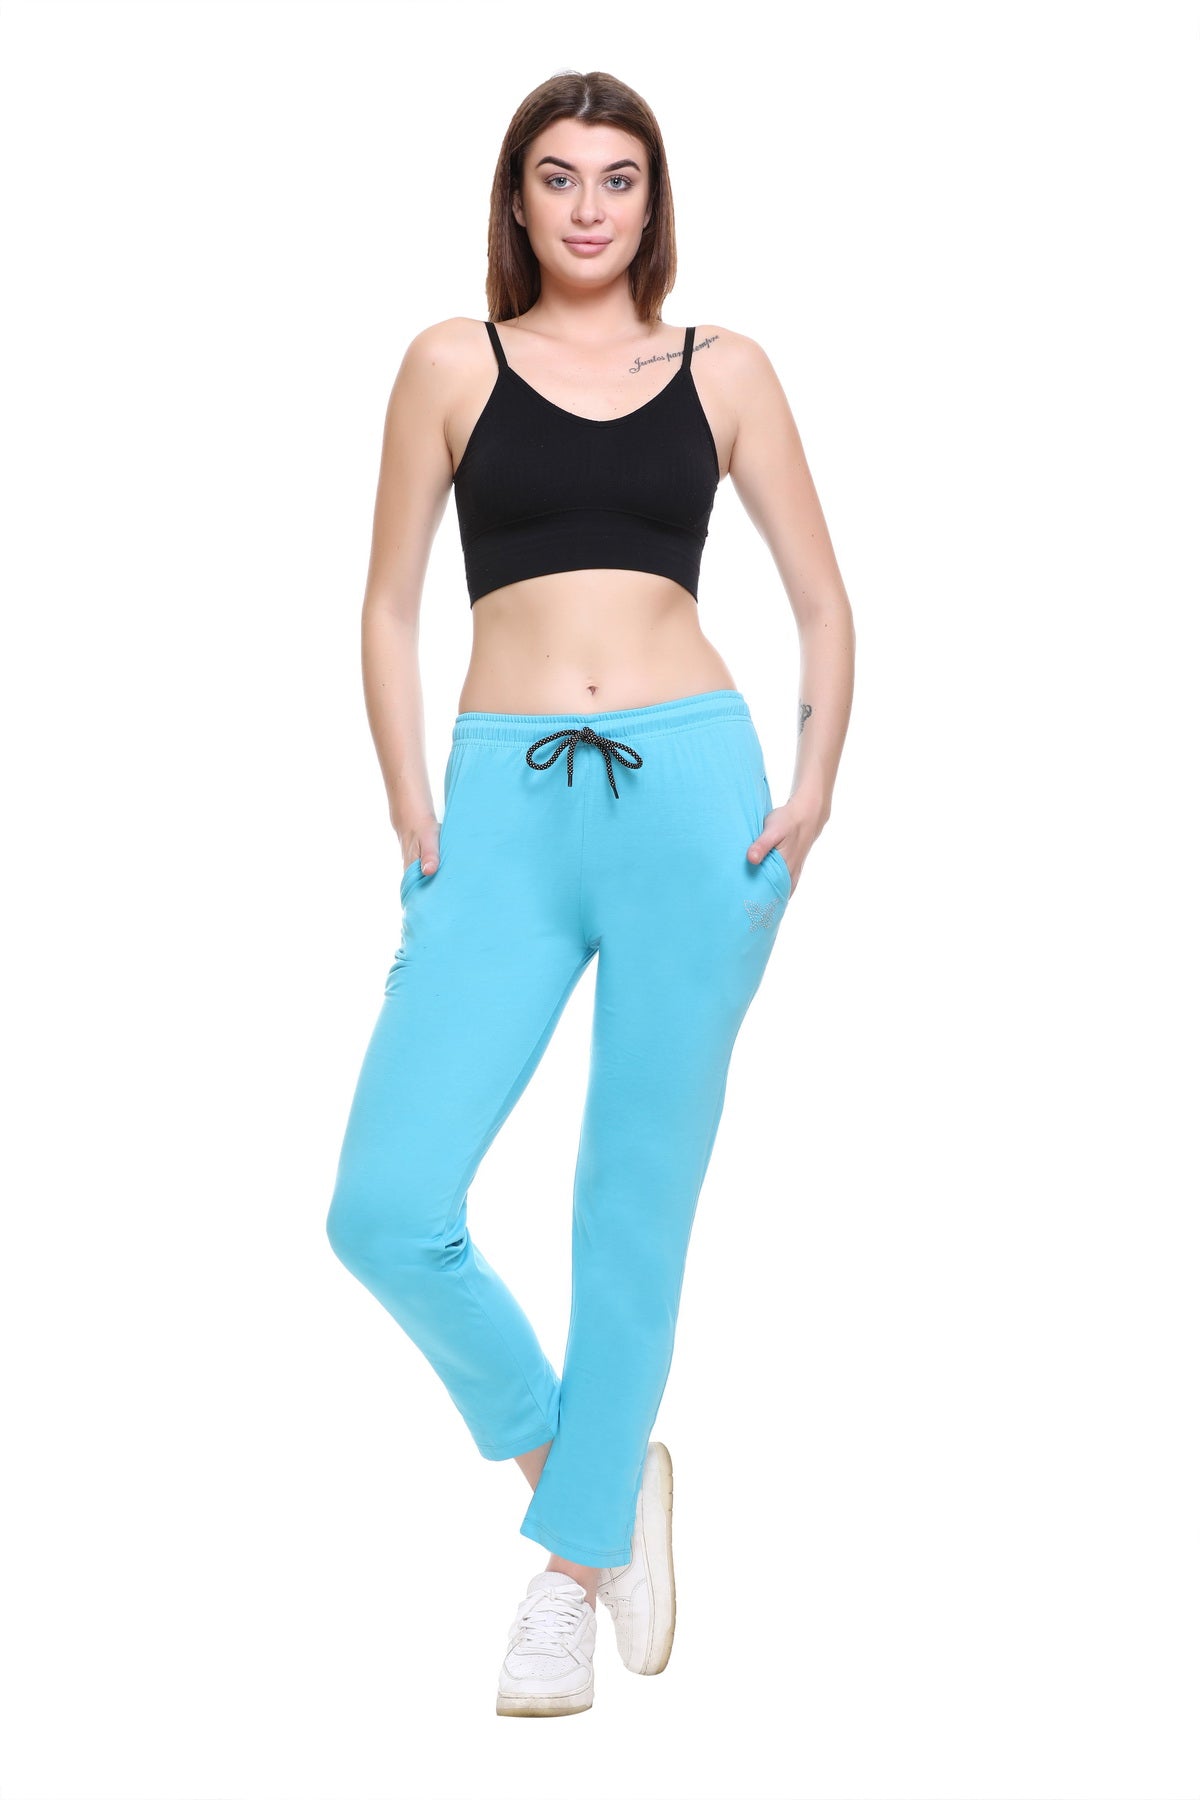 Comfy Aqua Cotton Track Pants For Women At Best Prices